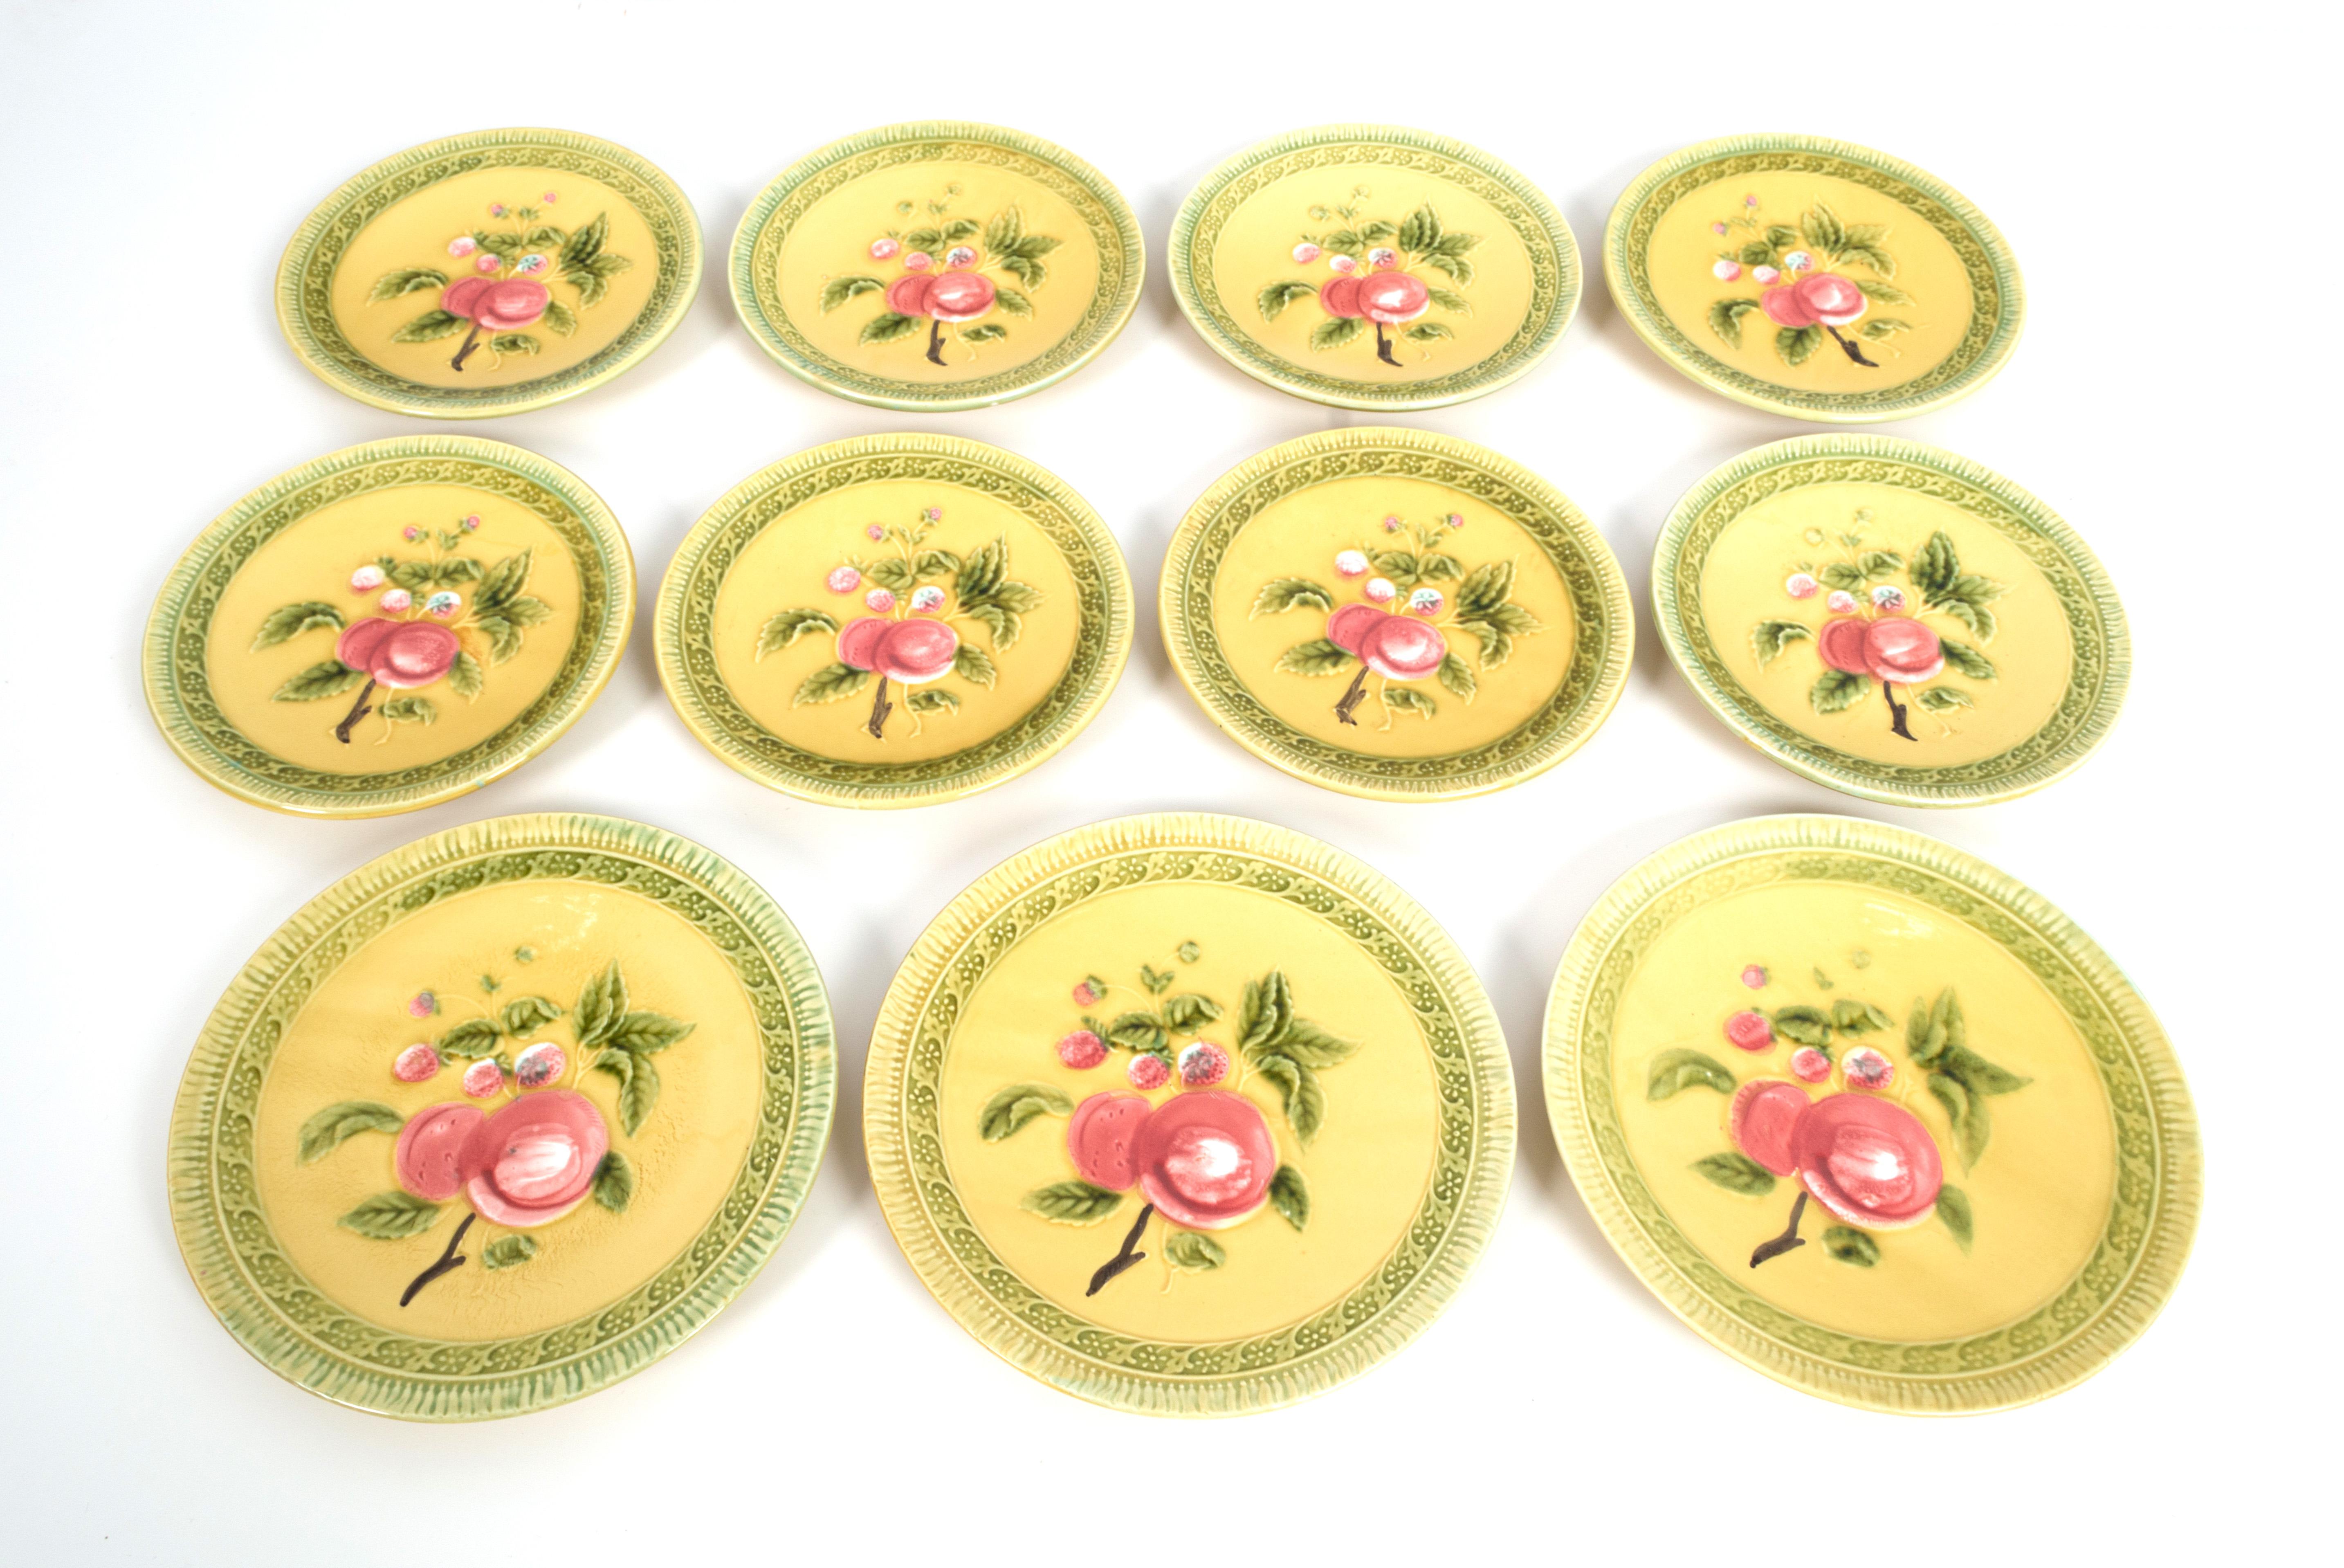 Set of 11 black forest German majolica plates, circa 1930.
Georg Schmider, Zell (1928- 1940).
Black Forest, Bade, Germany.

A set composed of 11 plates (8 x 17cm diameter and 3 x 20cm diameter).
Smaller Plates: (made in Germany stamp on